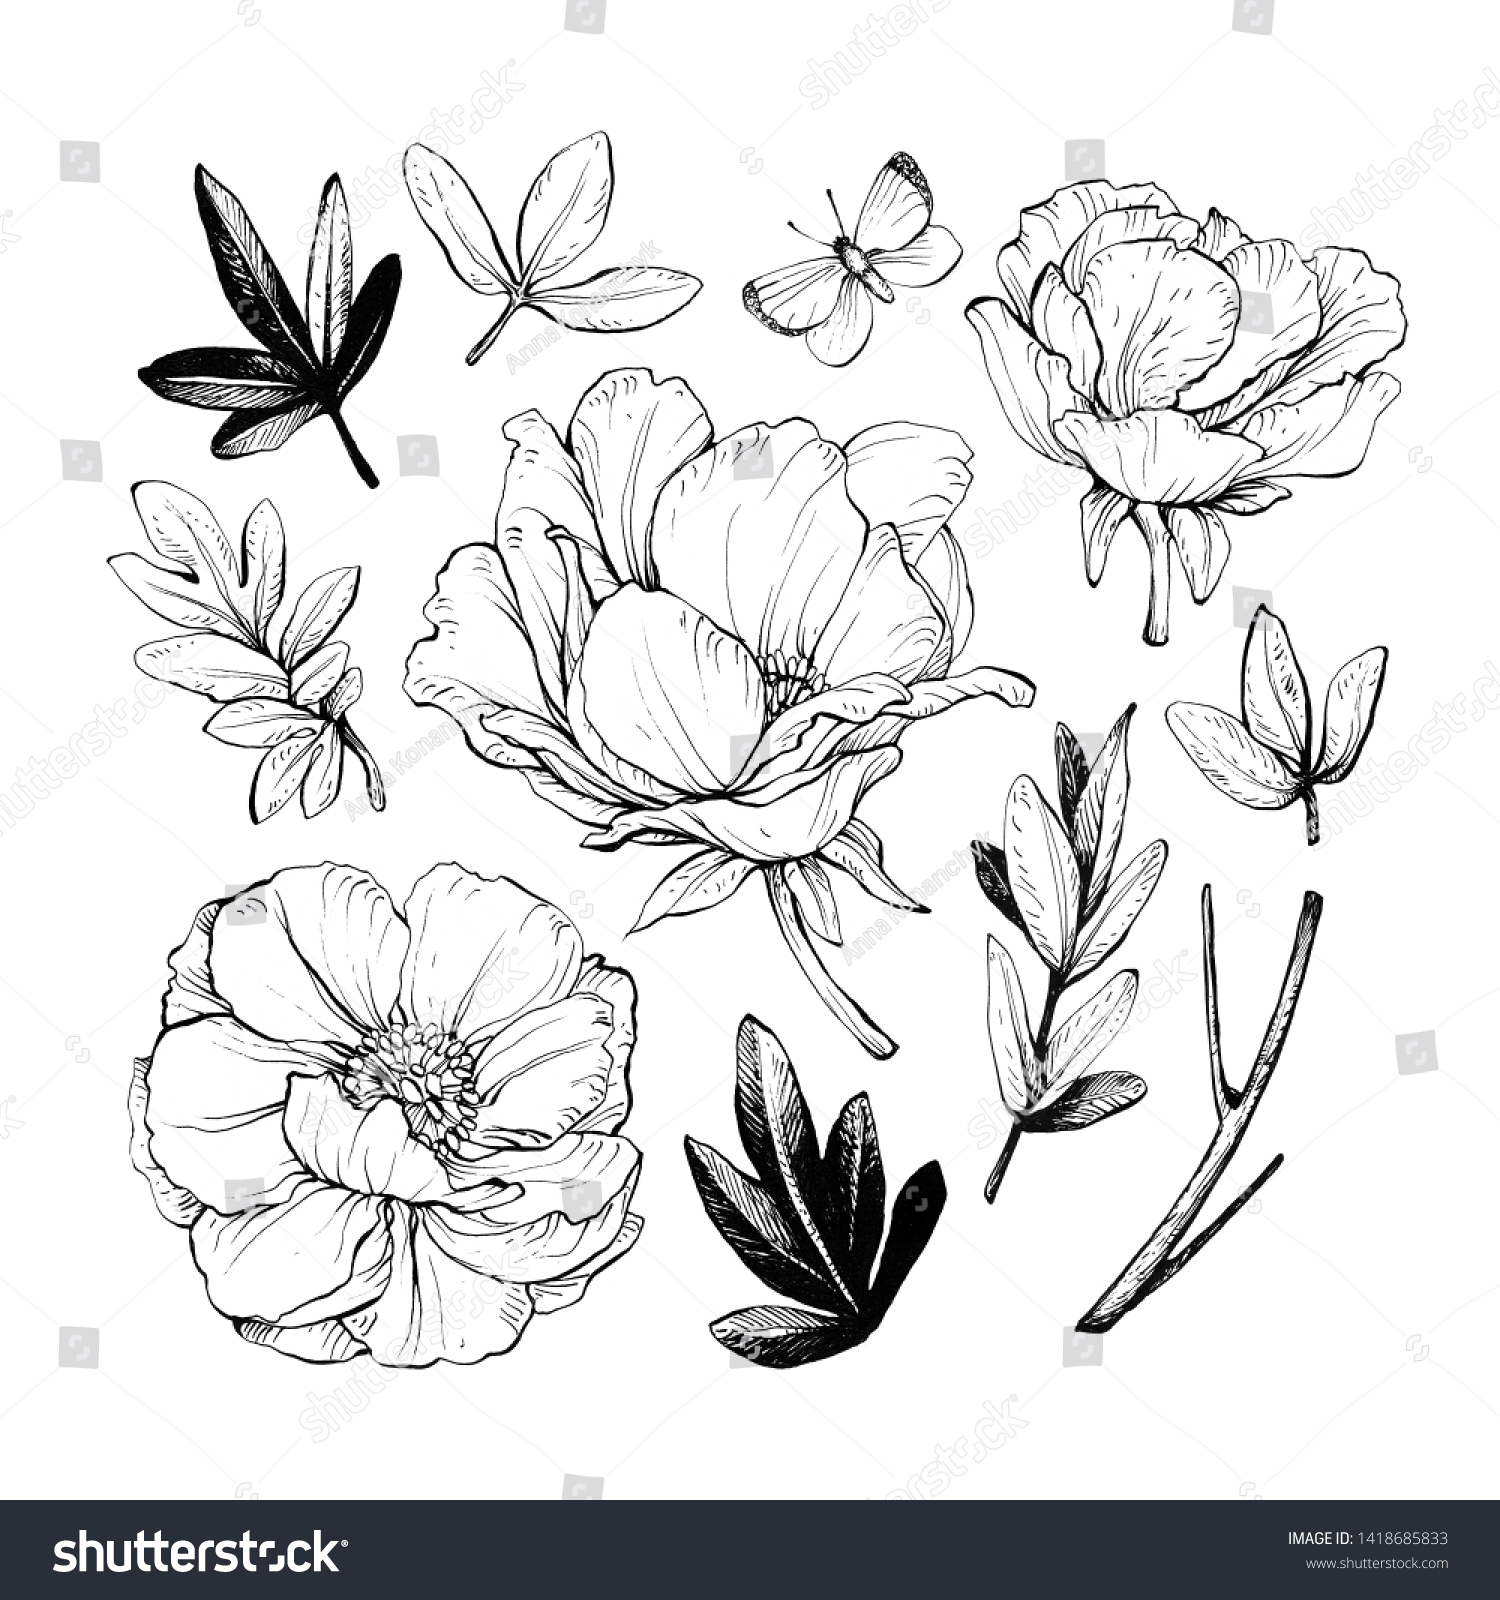 Set of peonies with leaves. Floral elements for design. Hand drawing with ink and pen. #1418685833